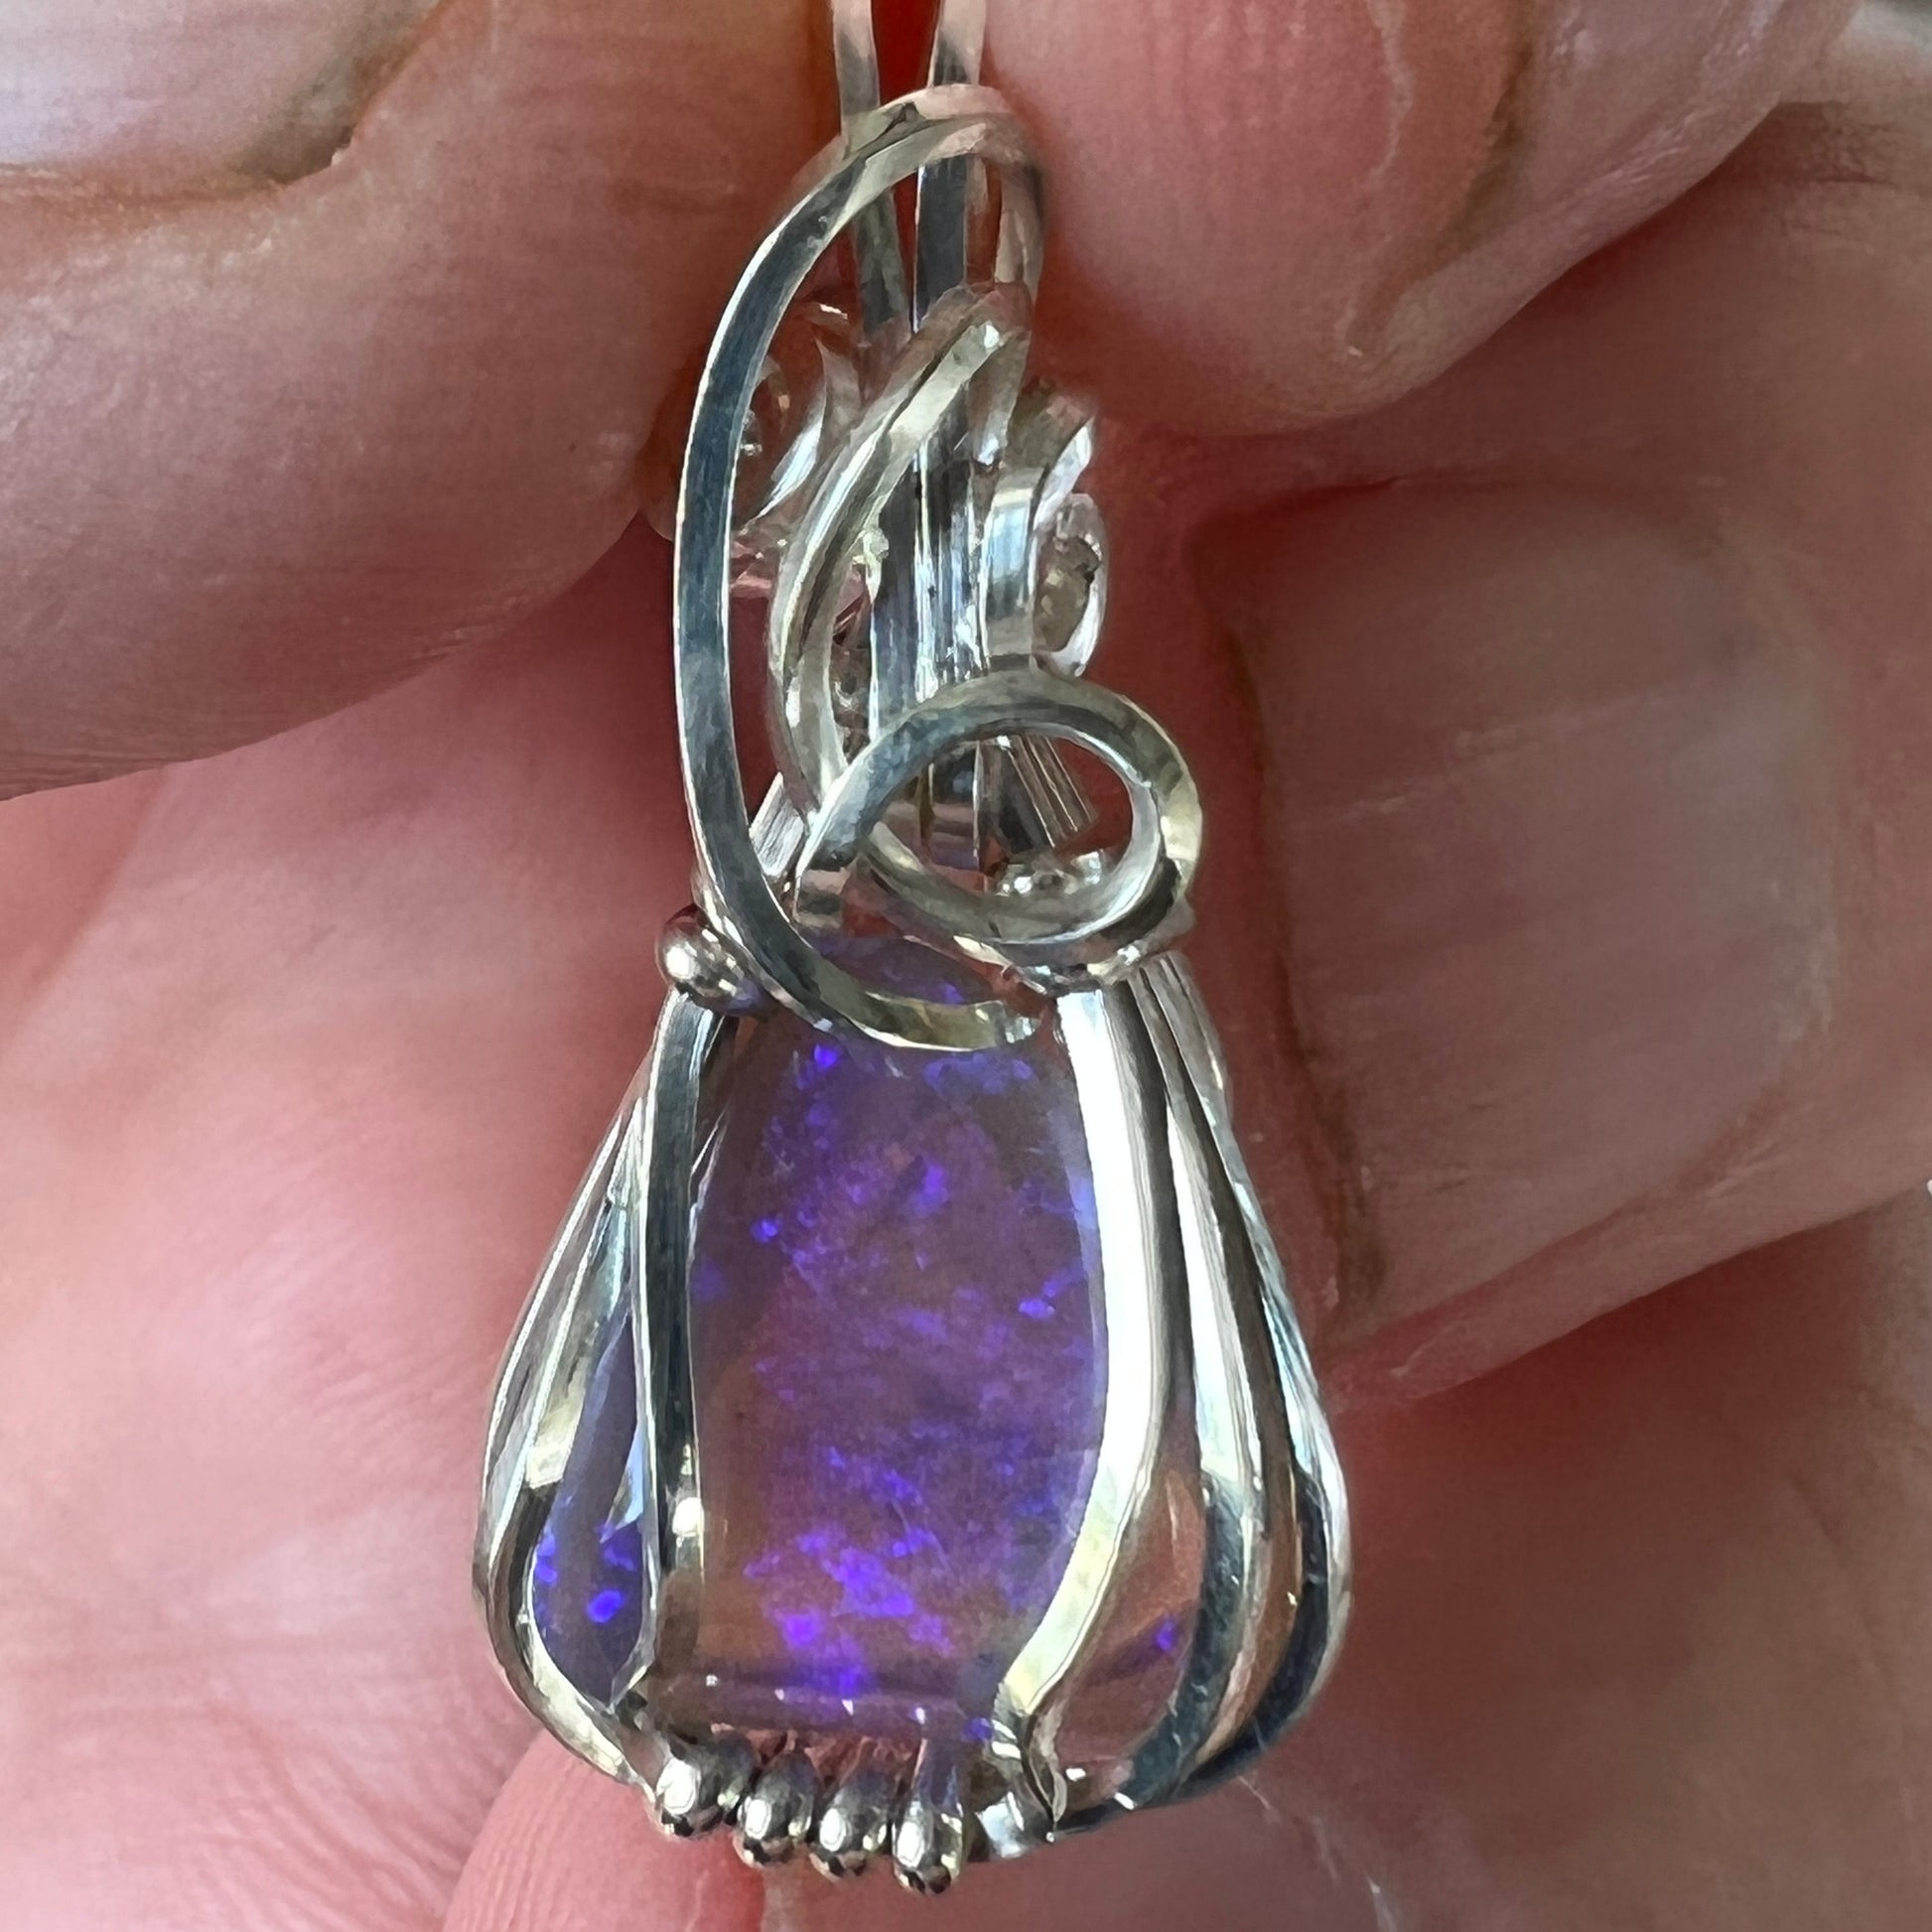 Beautifully cut Lightning Ridge Jelly Crystal opal. Cut and polished by Bill Johnson. Expertly set in a unique wire silver wrap. An awesome hand made gift.